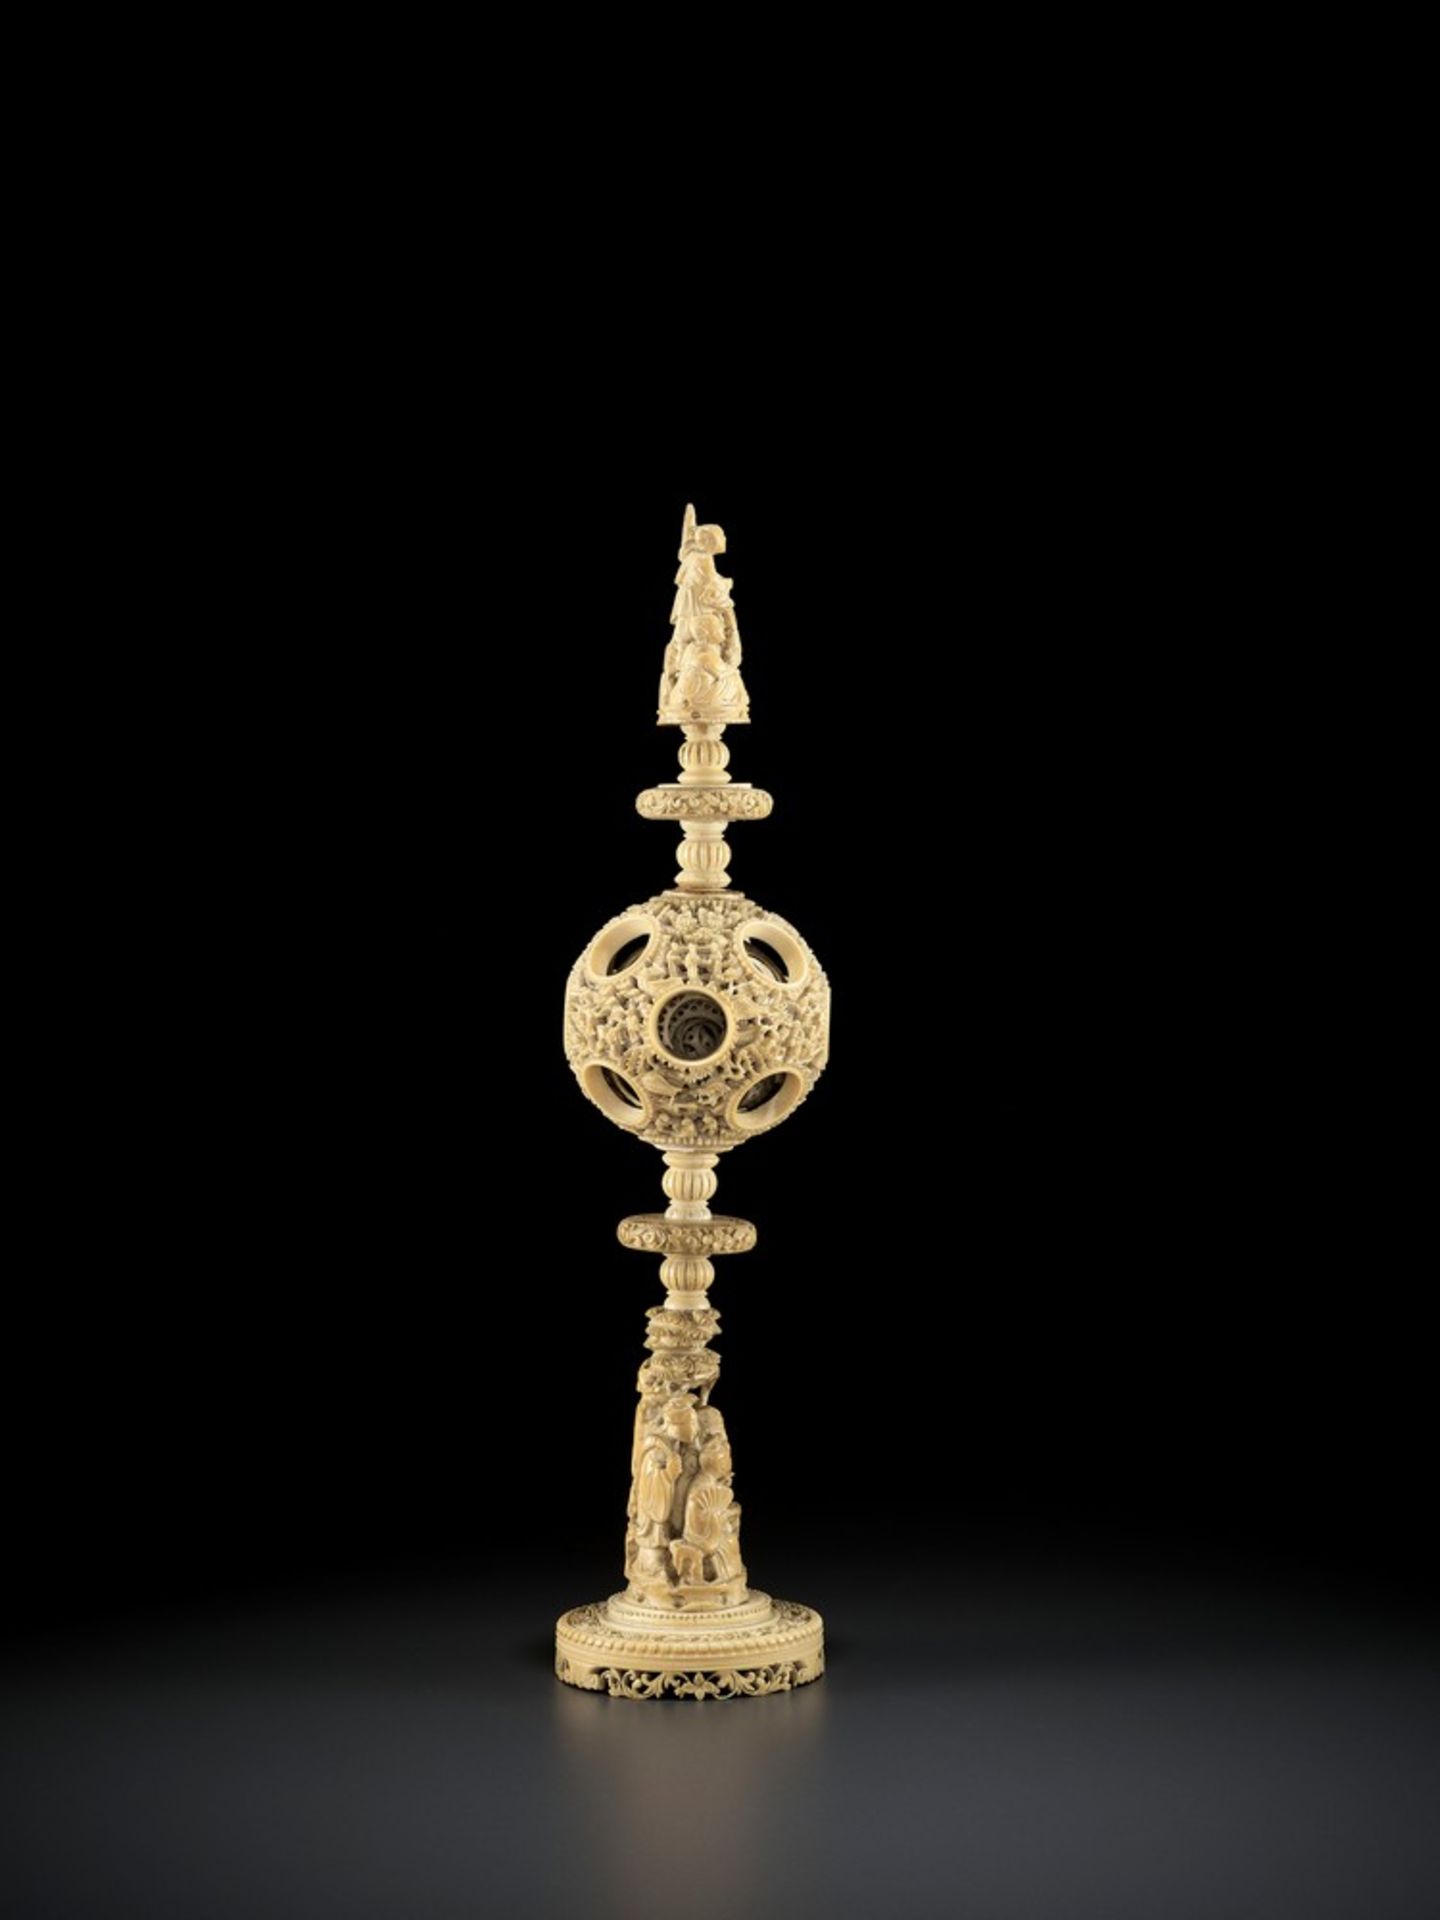 A CANTON SCHOOL 'MAGIC' IVORY BALL ON A TALL STAND, QING DYNASTY - Image 7 of 13